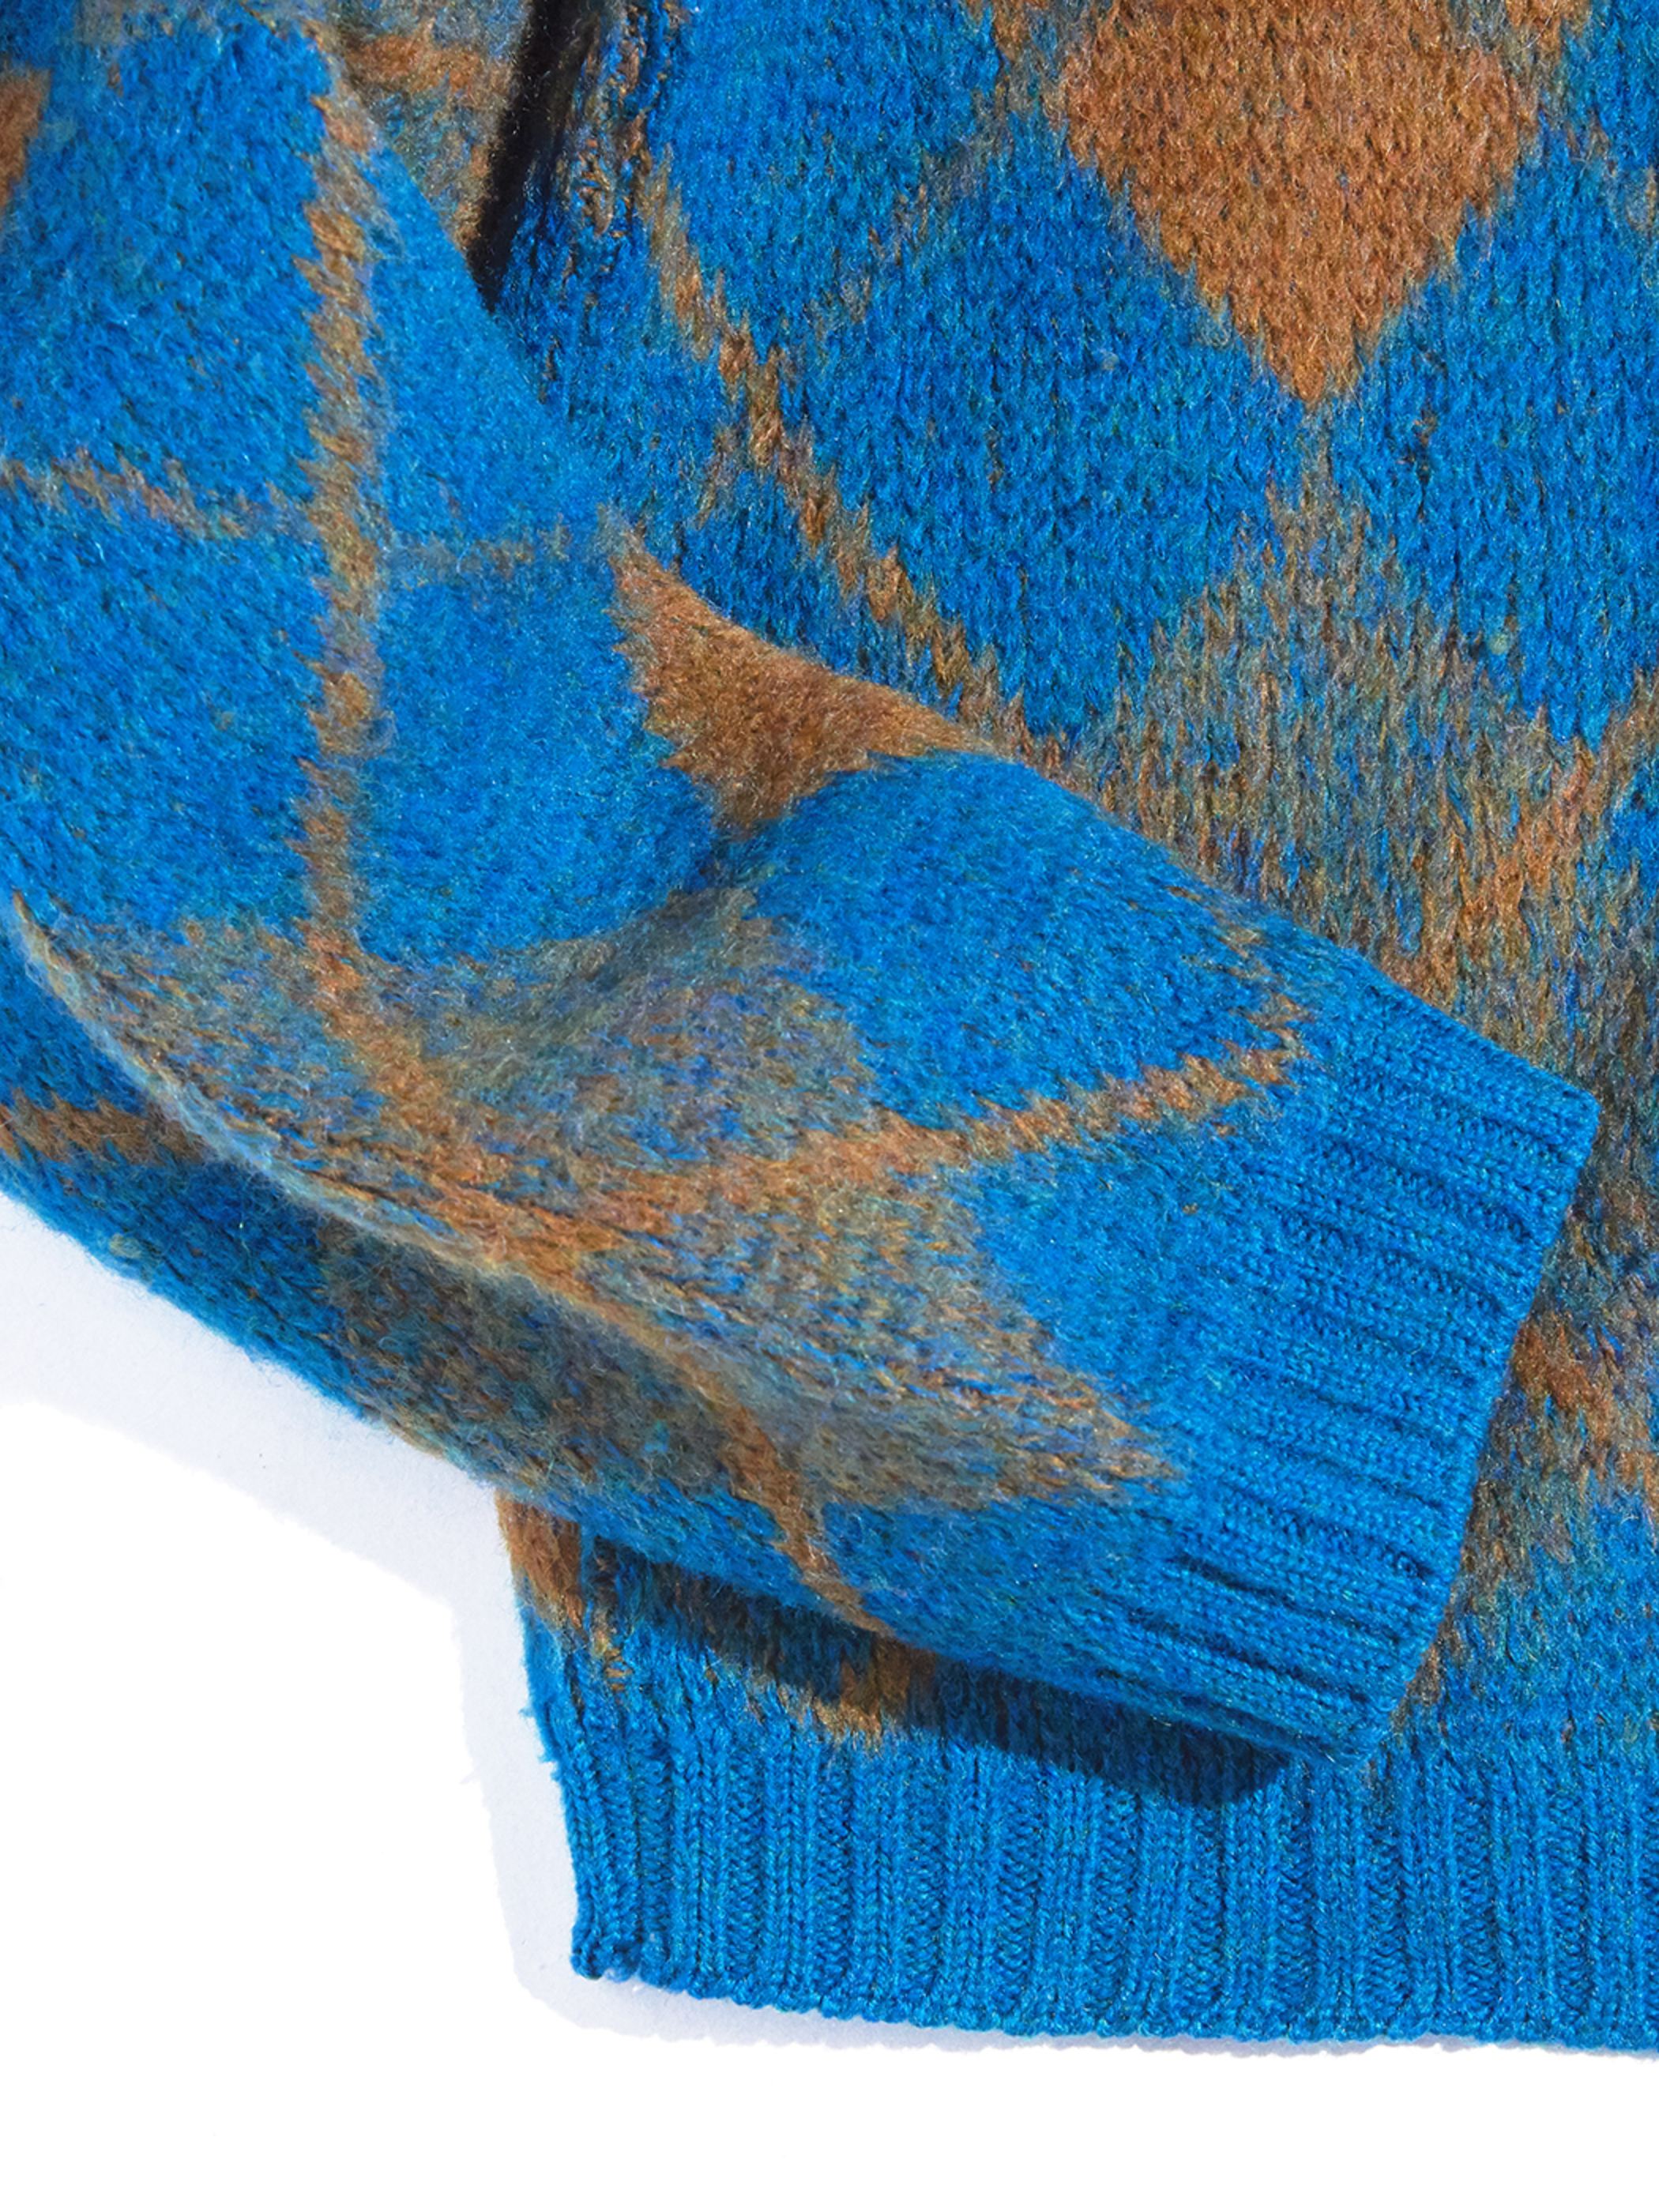 1970s "unknown" turtle neck argyle pattern mohair knit -TURQUOISE-